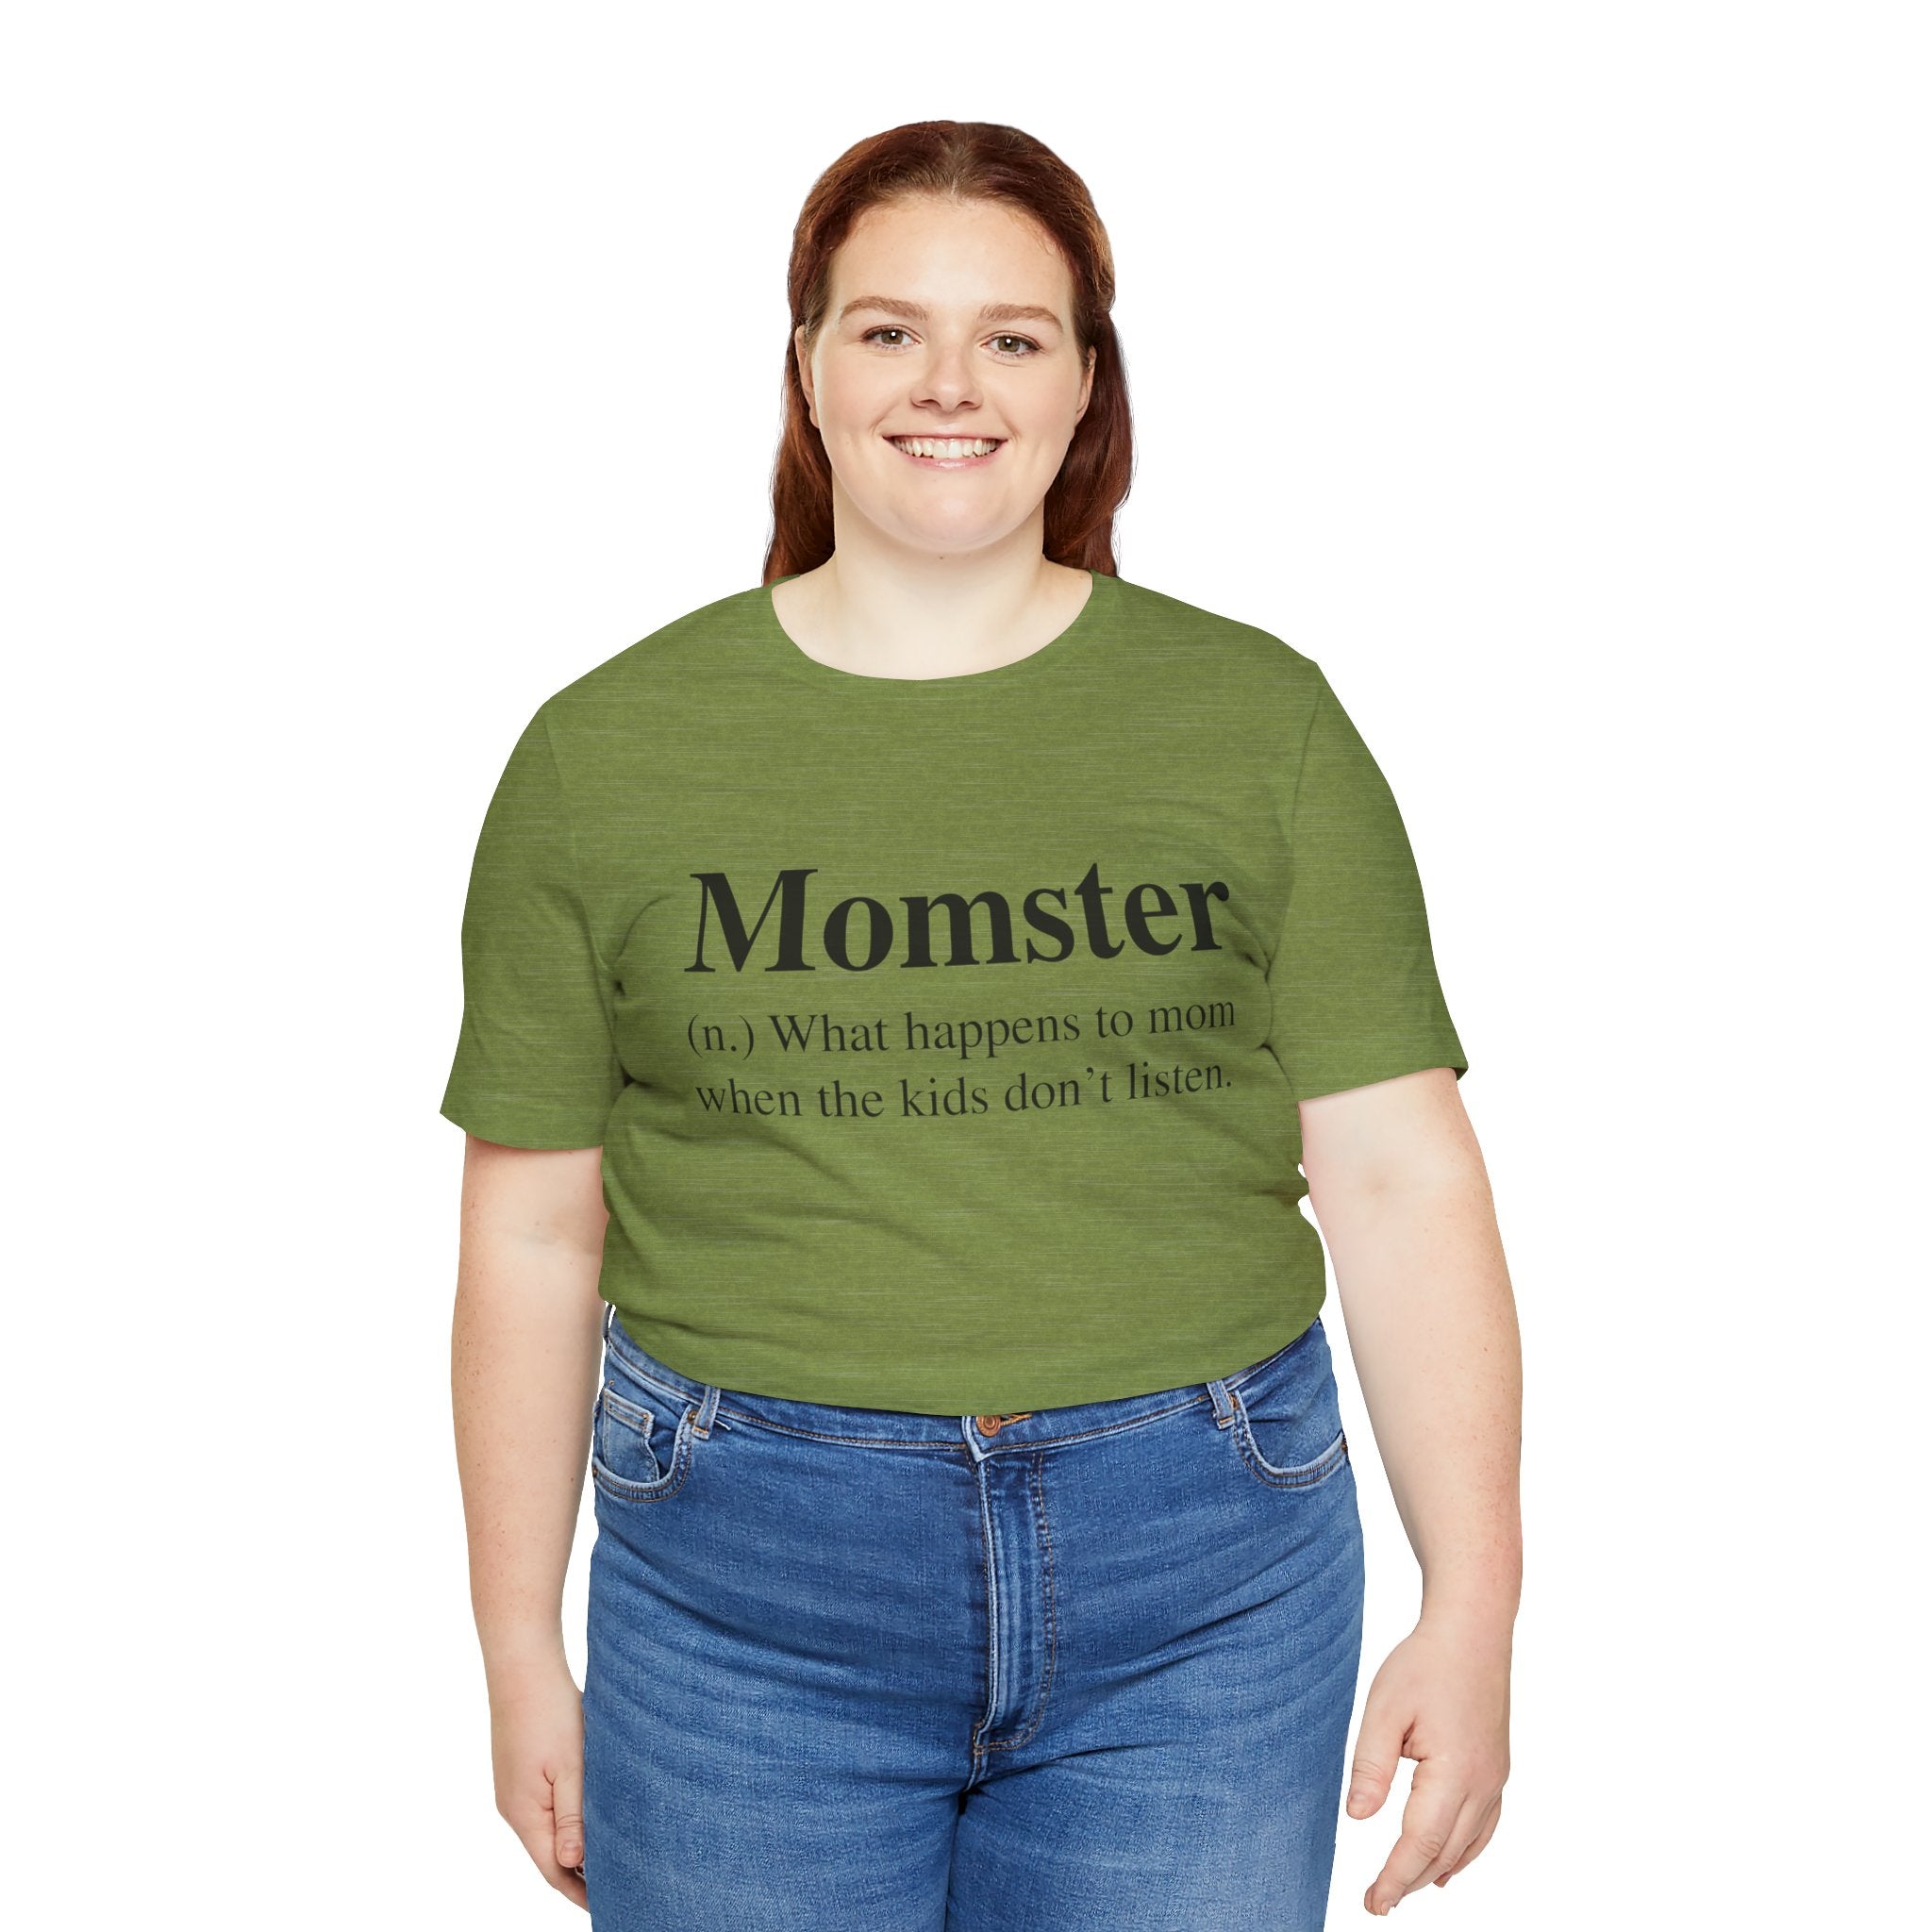 Woman smiling, wearing a green, soft cotton Momster T-shirt and blue jeans, standing against a white background.